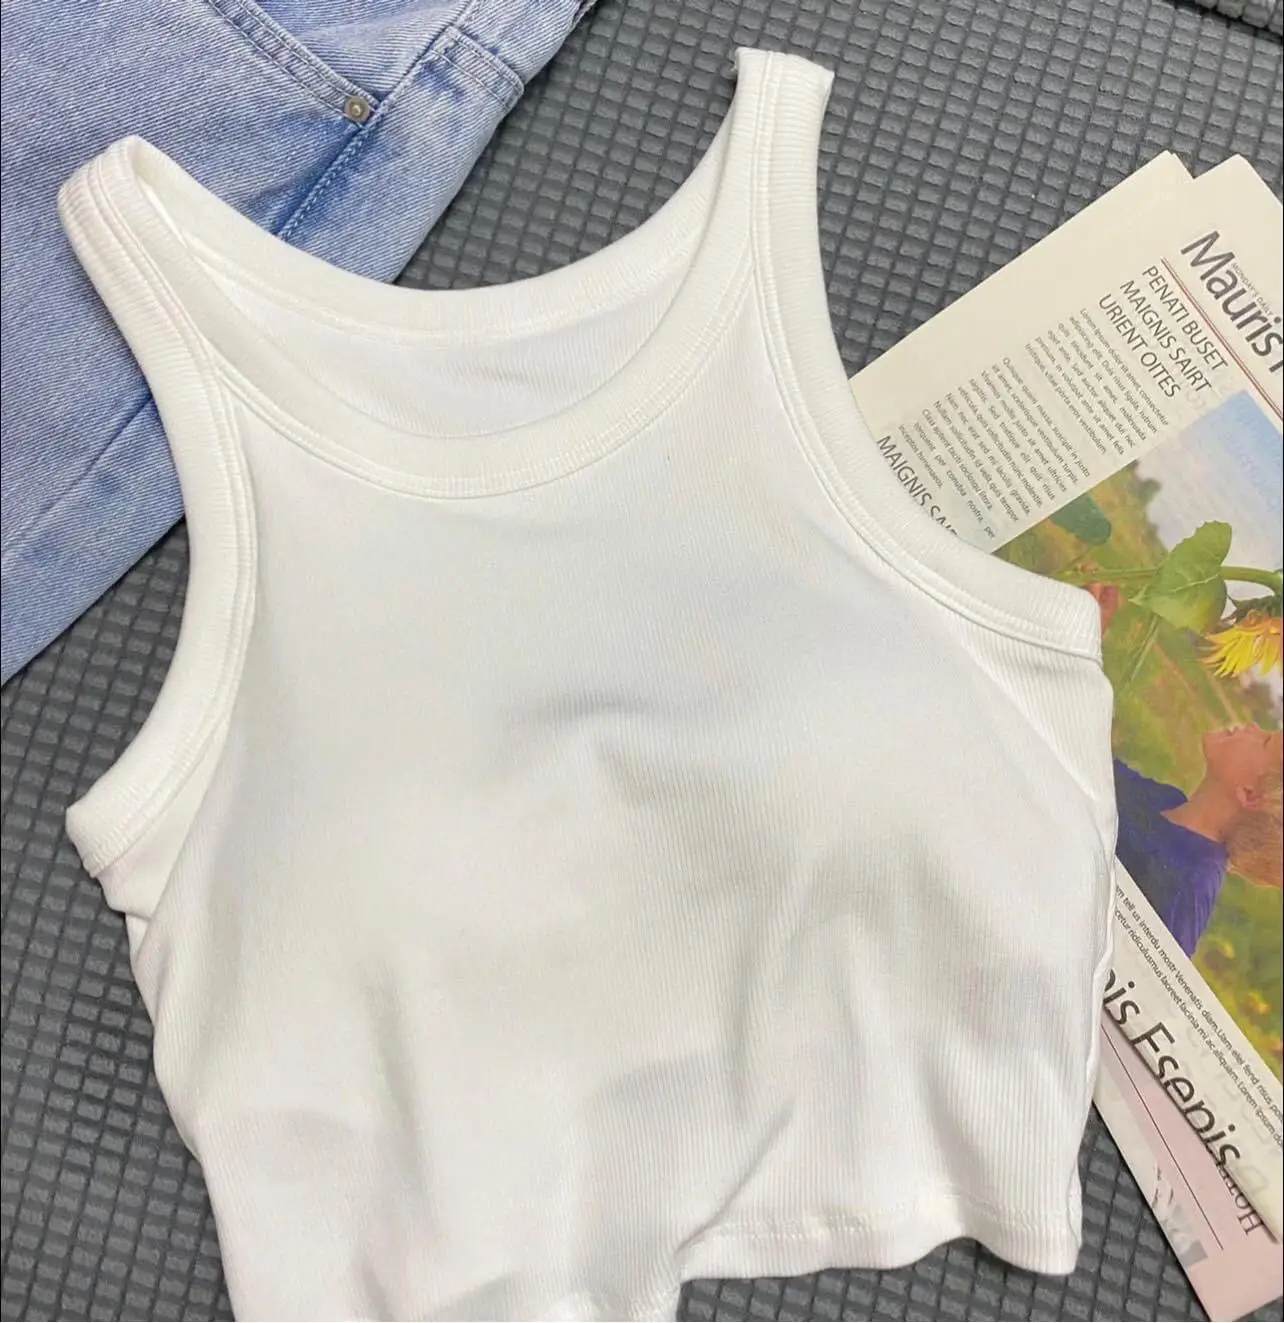 Lemon8 United States, HACK: how to hide your bra in halter tops + tanks hi  friends🍋 Have you ever worn a halter top or racer back tank, and your bra  strap